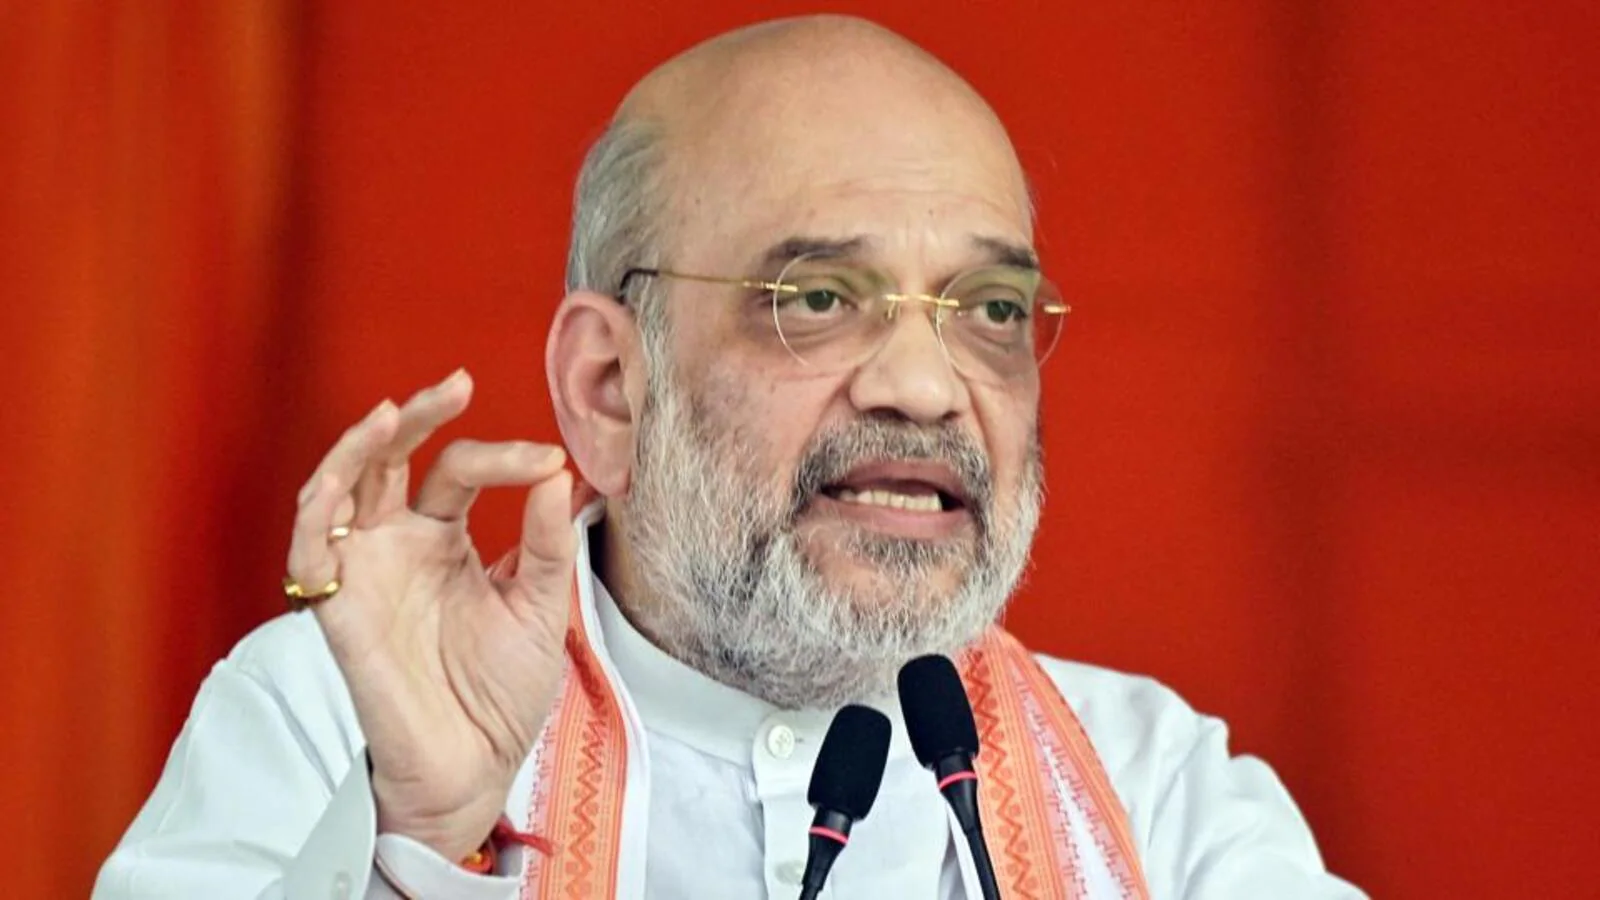 “If BJP Wins, We Will Scrap Muslim Reservation and Give it to SC, ST, and OBC,” Says Amit Shah in Telangana